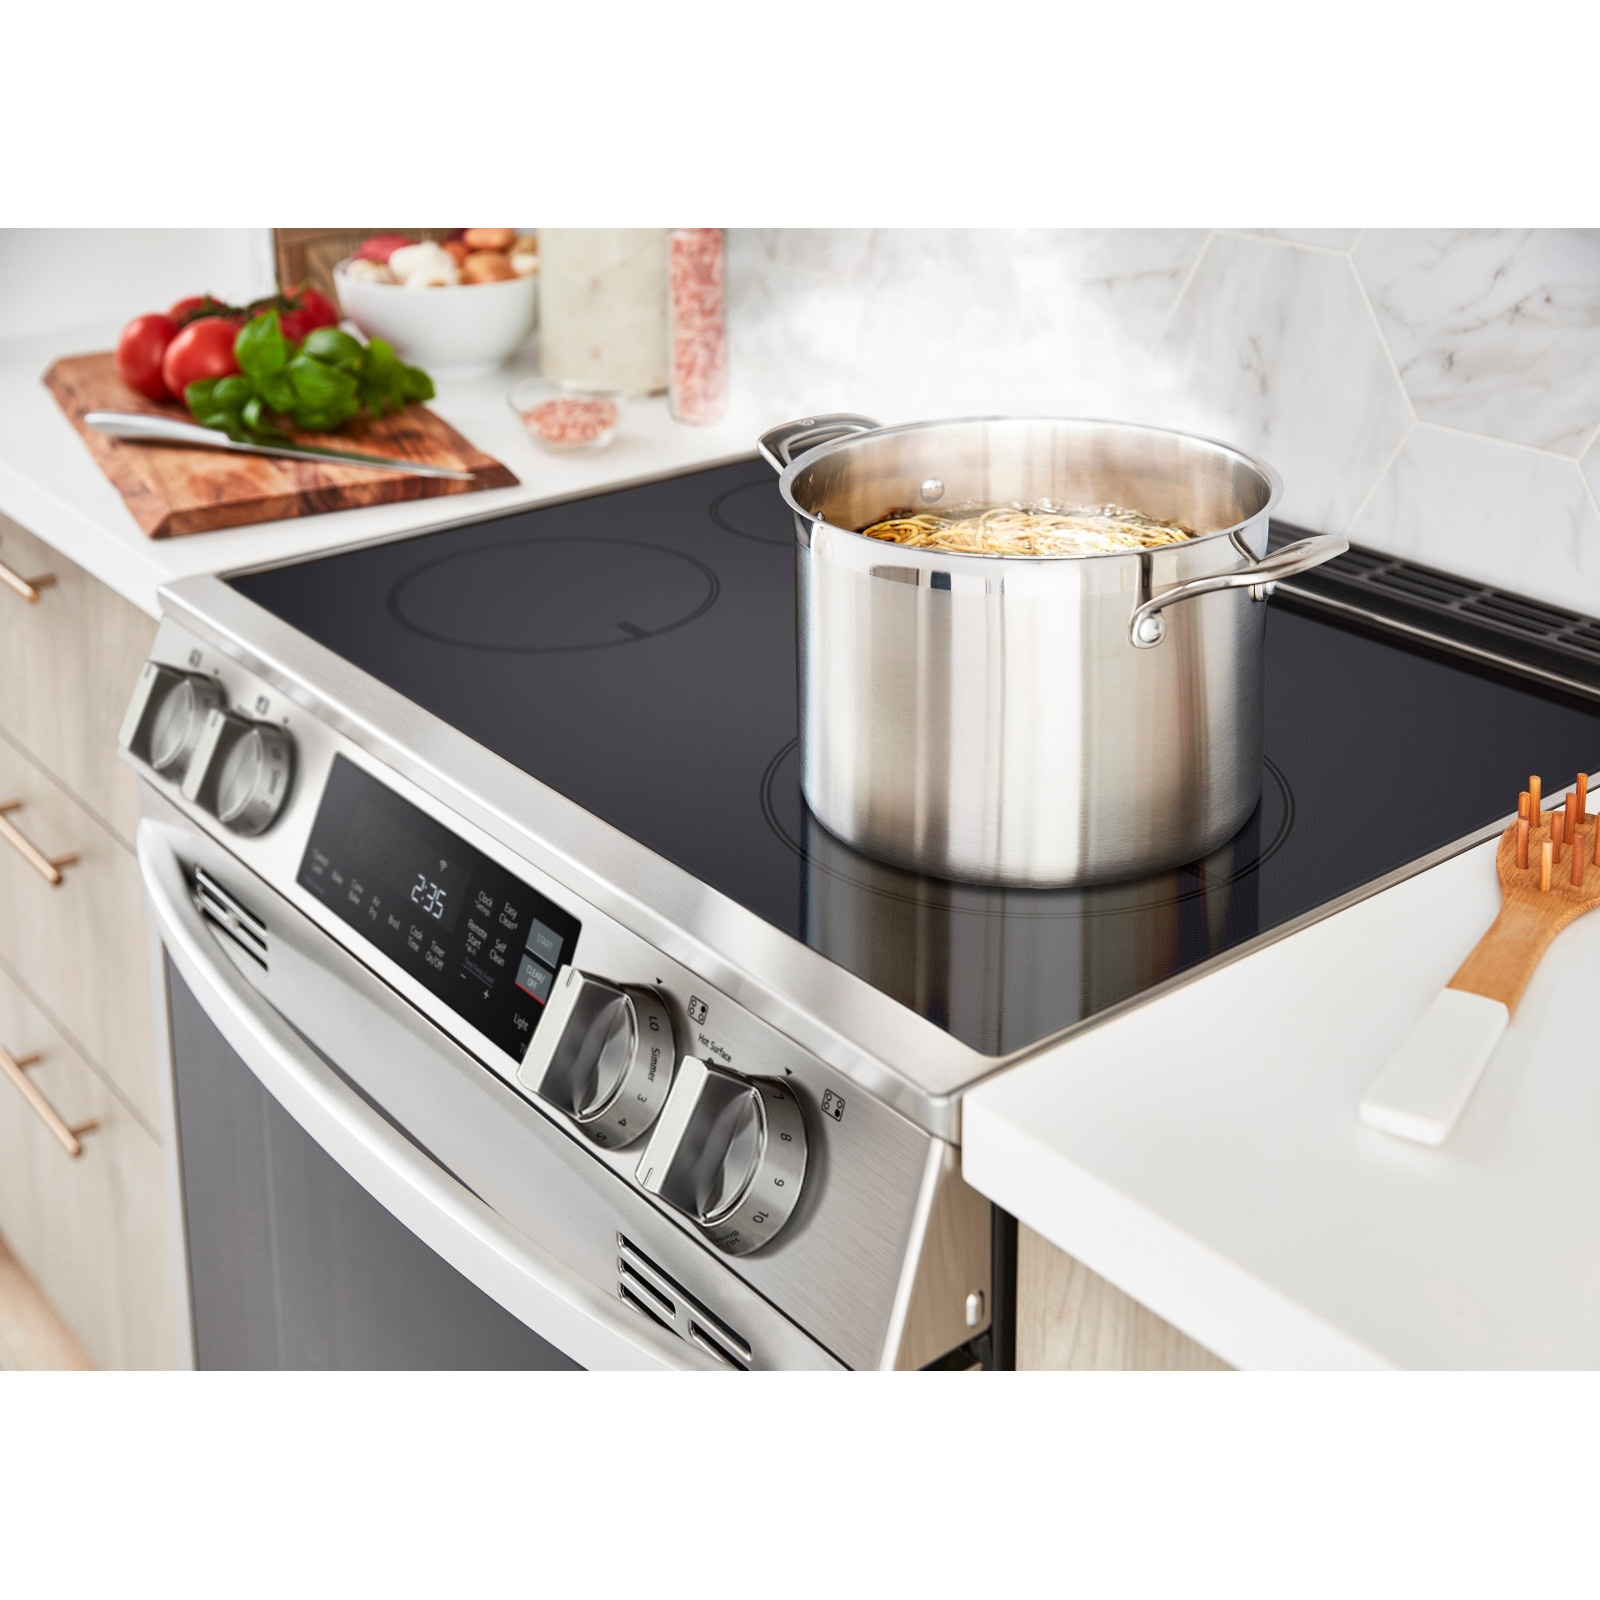 Induction Technology for Powerful, Precision Cooking